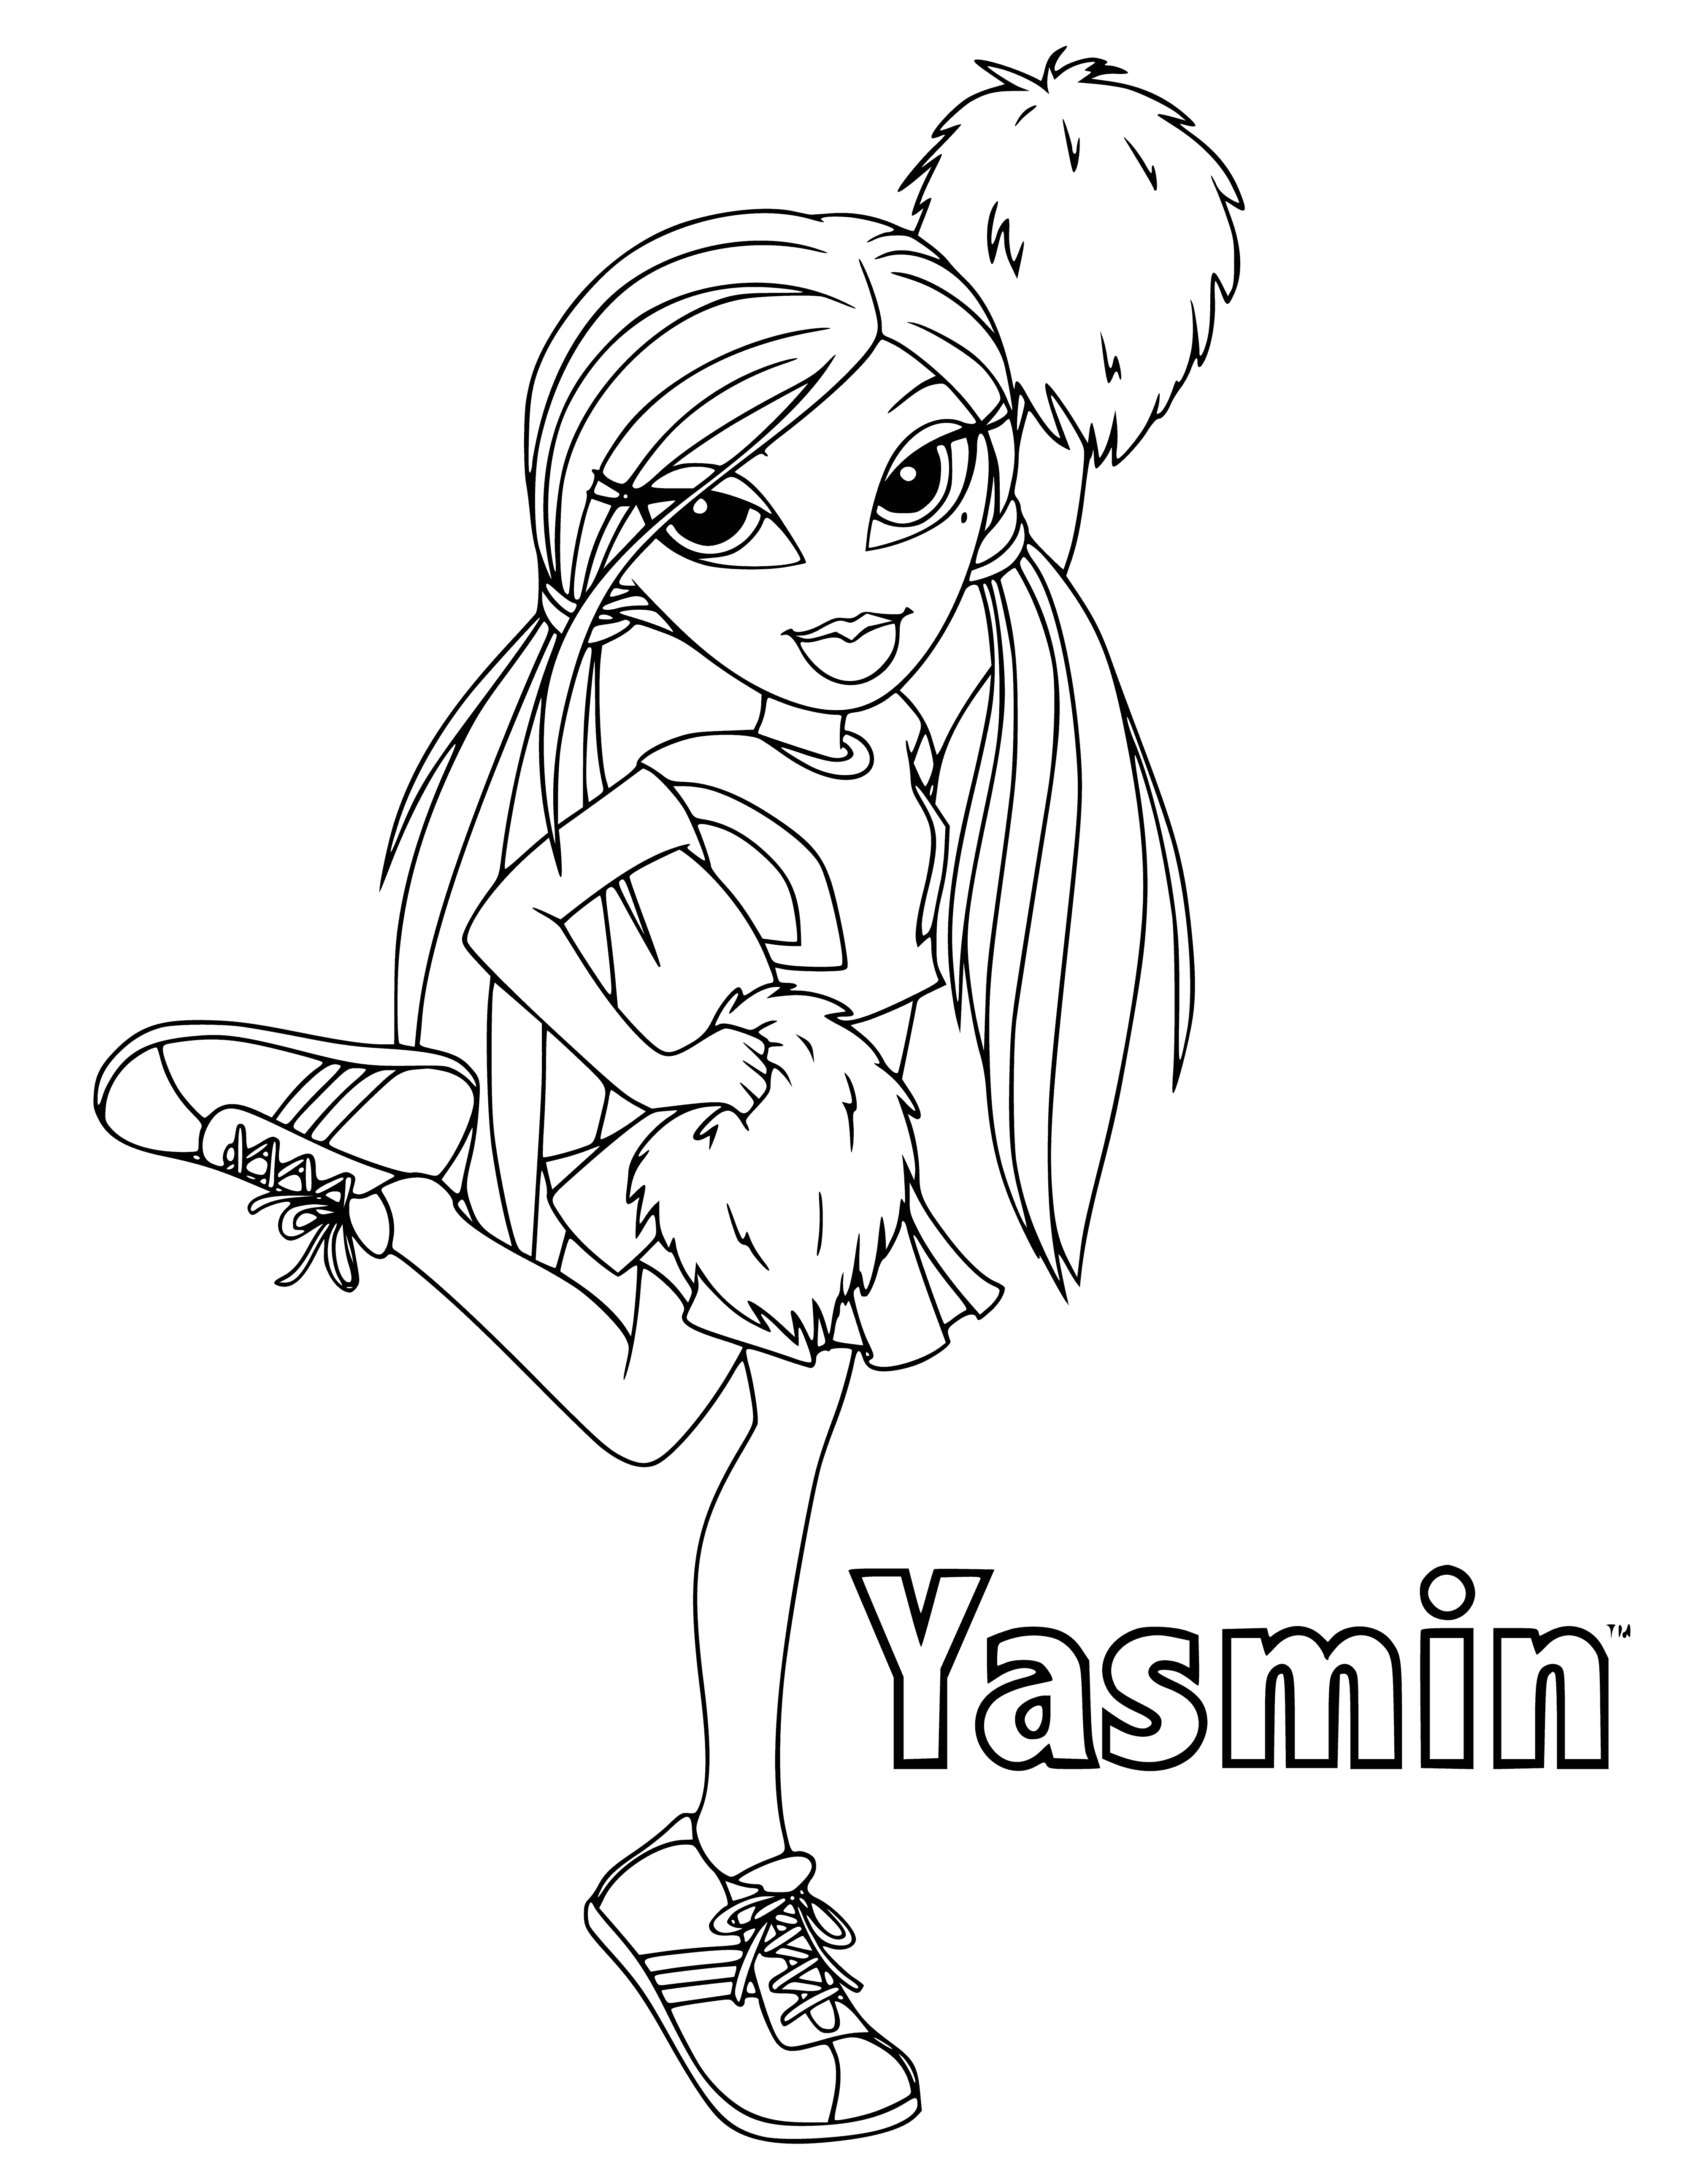 coloring page: Girl with long black hair and polka-dotted skirt. Wearing white tank and black/white earrings and bracelet. #MannequinChallenge